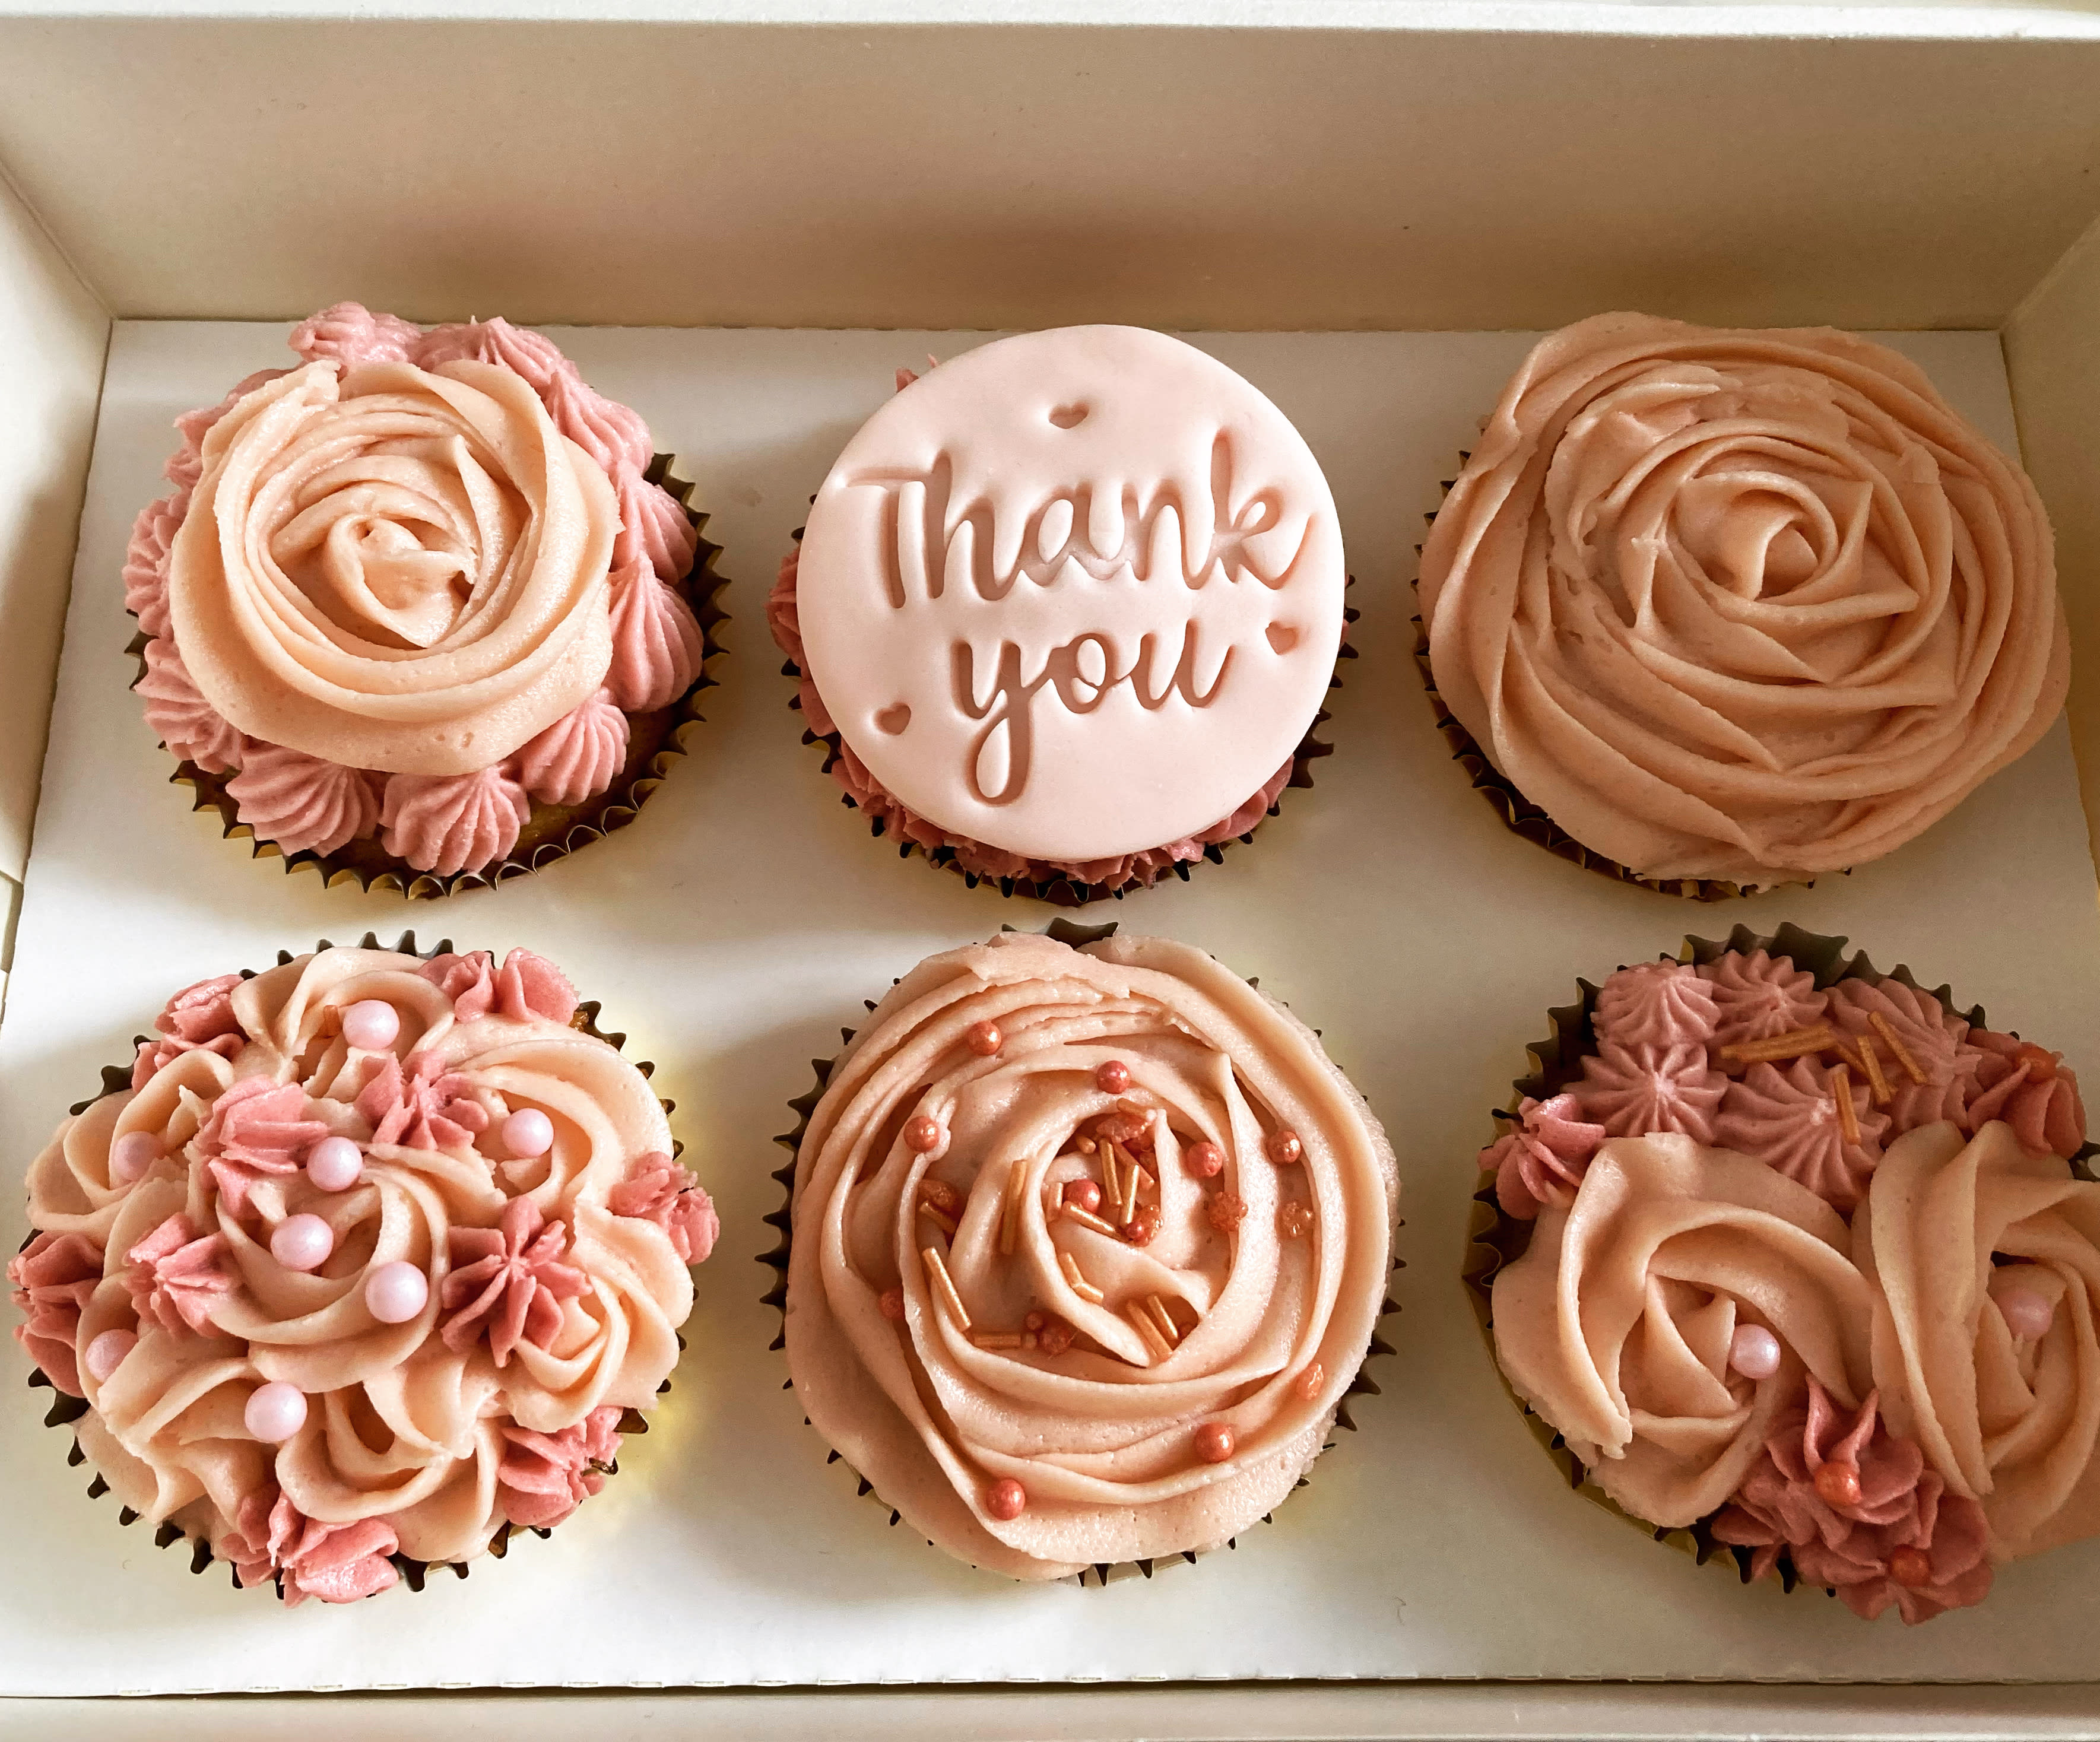 Thank you cakes | Cakes by Rosa